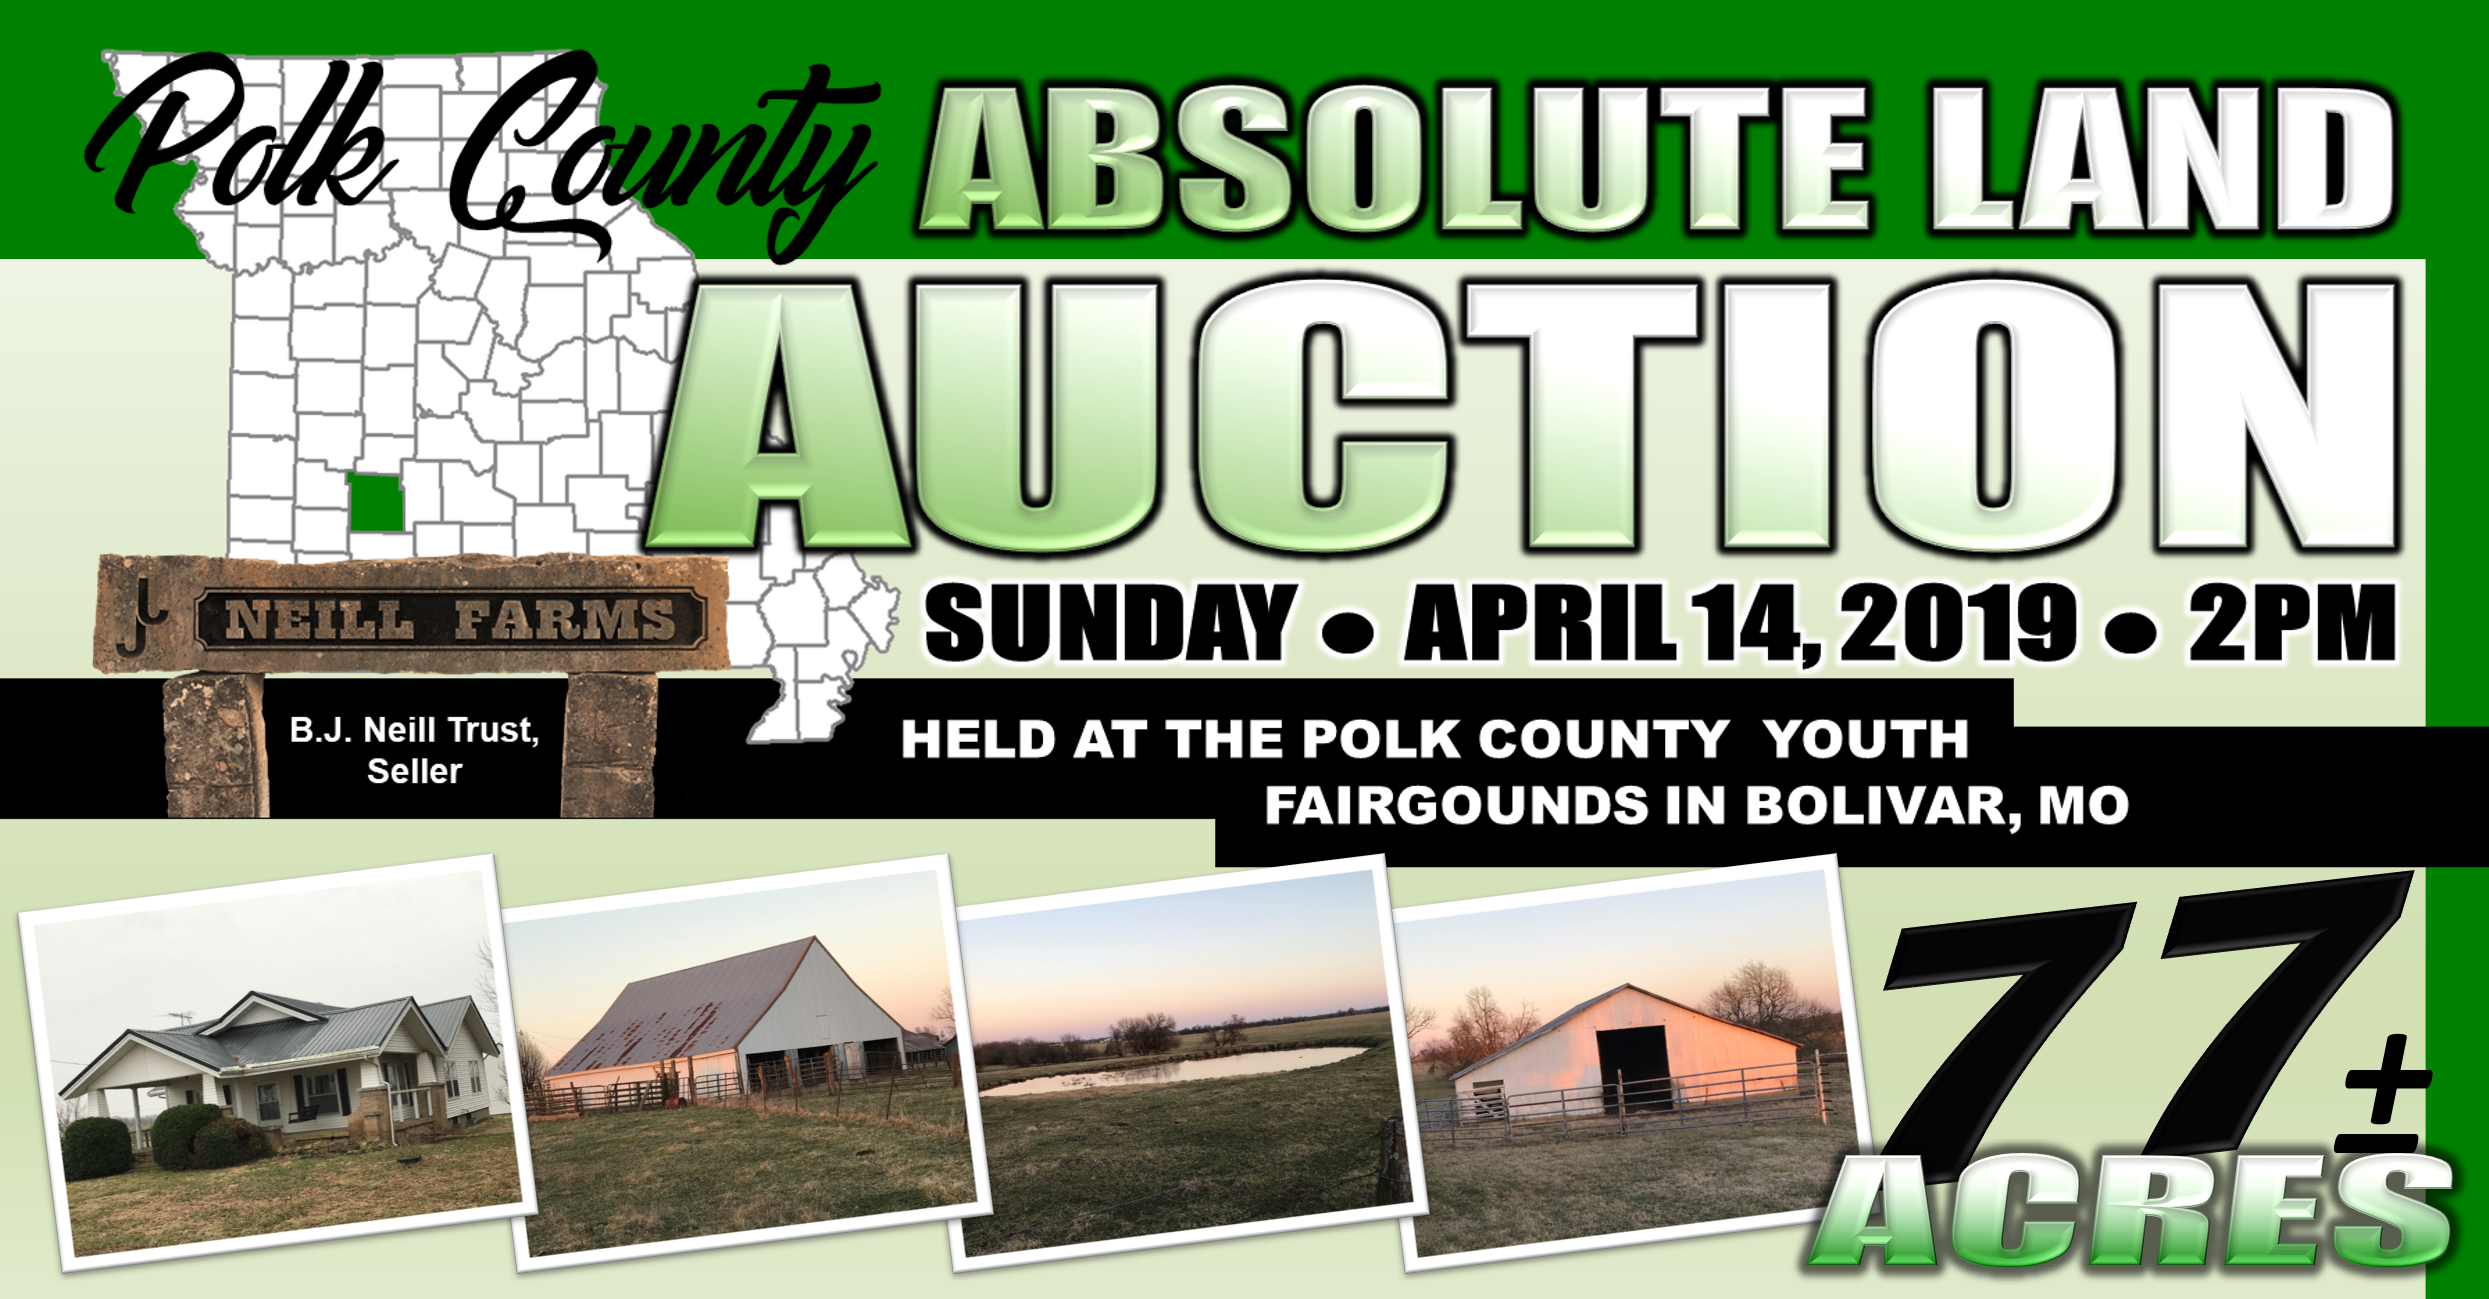 ABSOLUTE POLK COUNTY LAND AUCTION